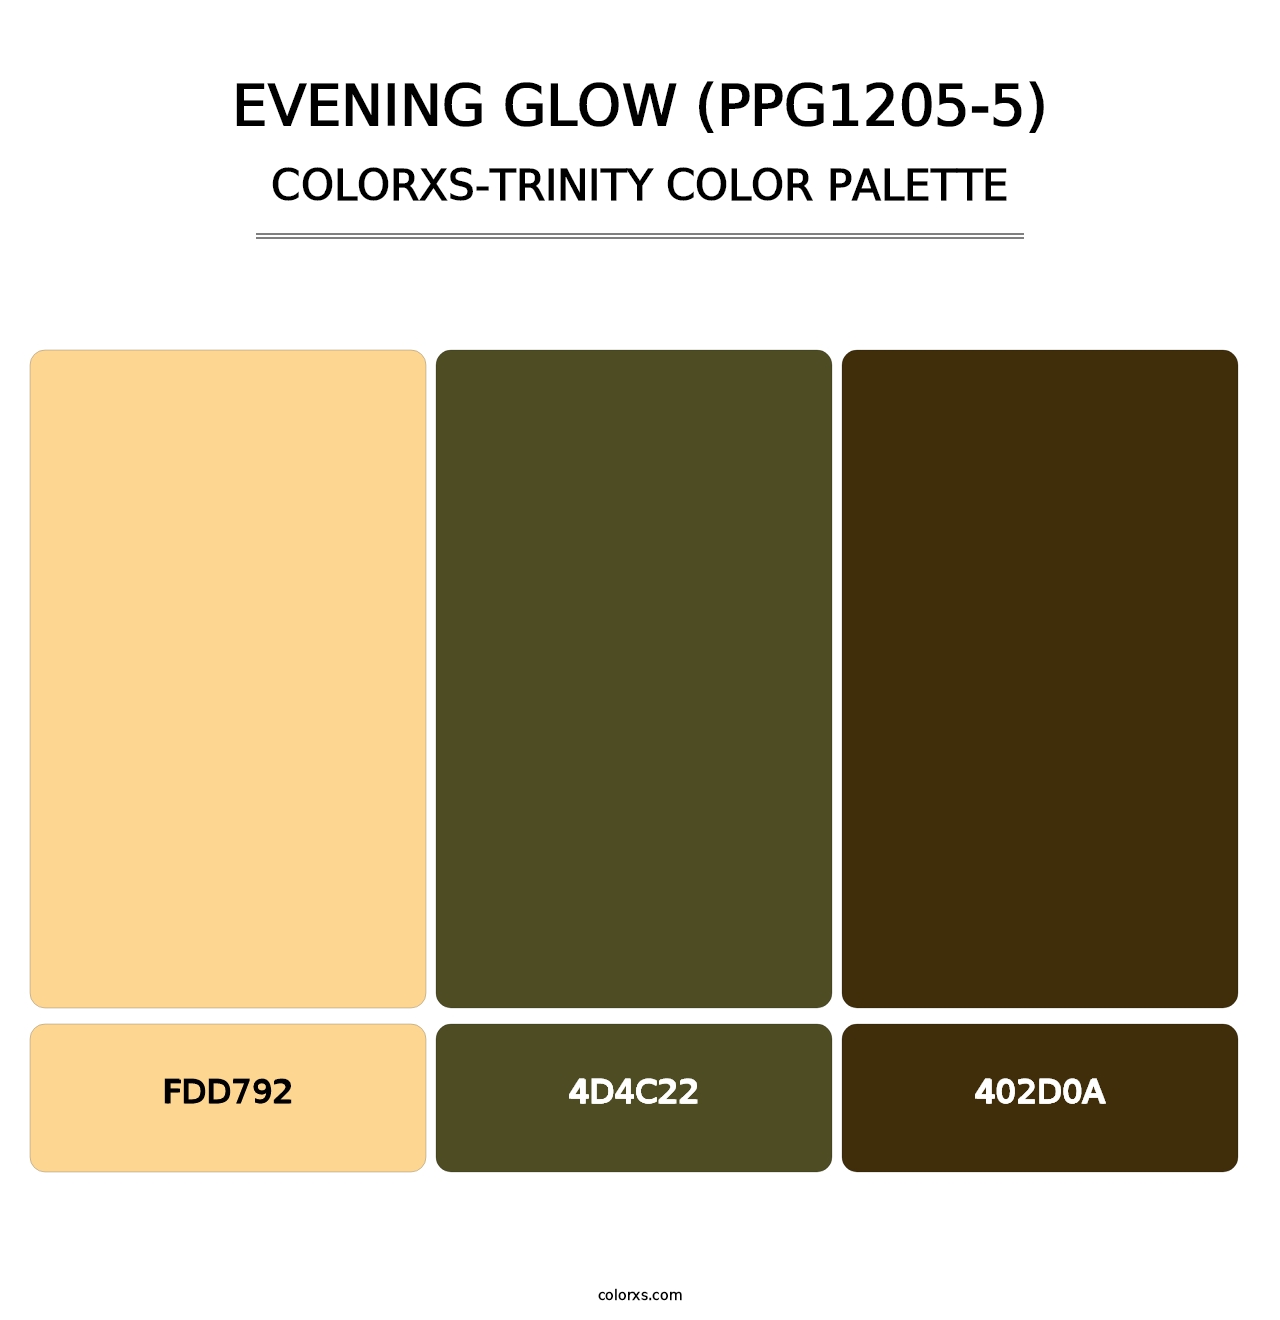 Evening Glow (PPG1205-5) - Colorxs Trinity Palette